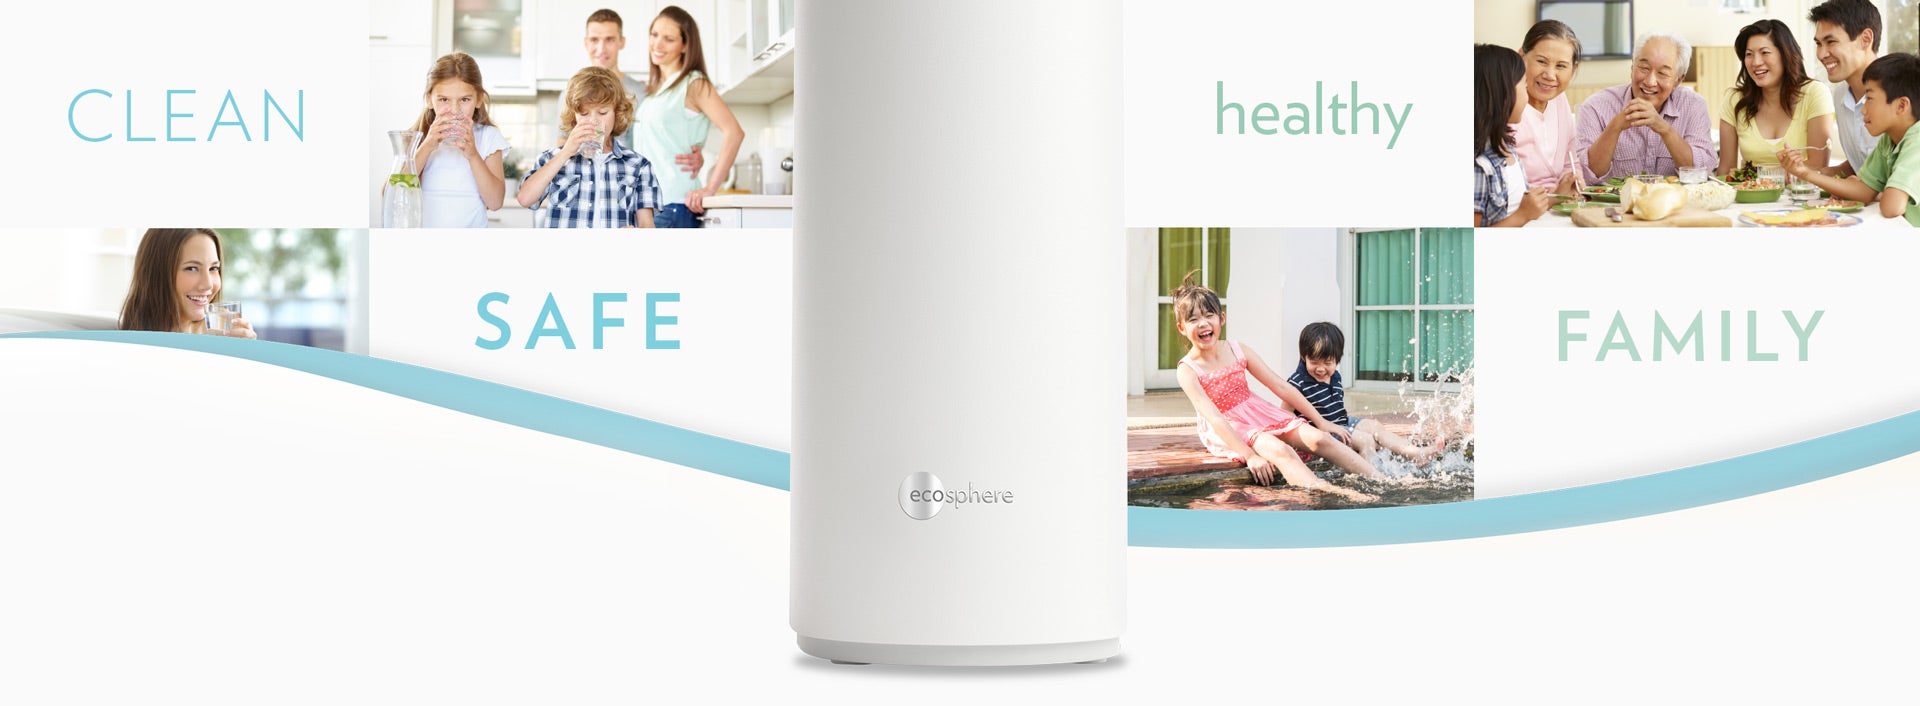 Montage photo of lifestyle home, family images with EcoSphere Water Purifier and brand keywords of Clean, Safe, Healthy, Family